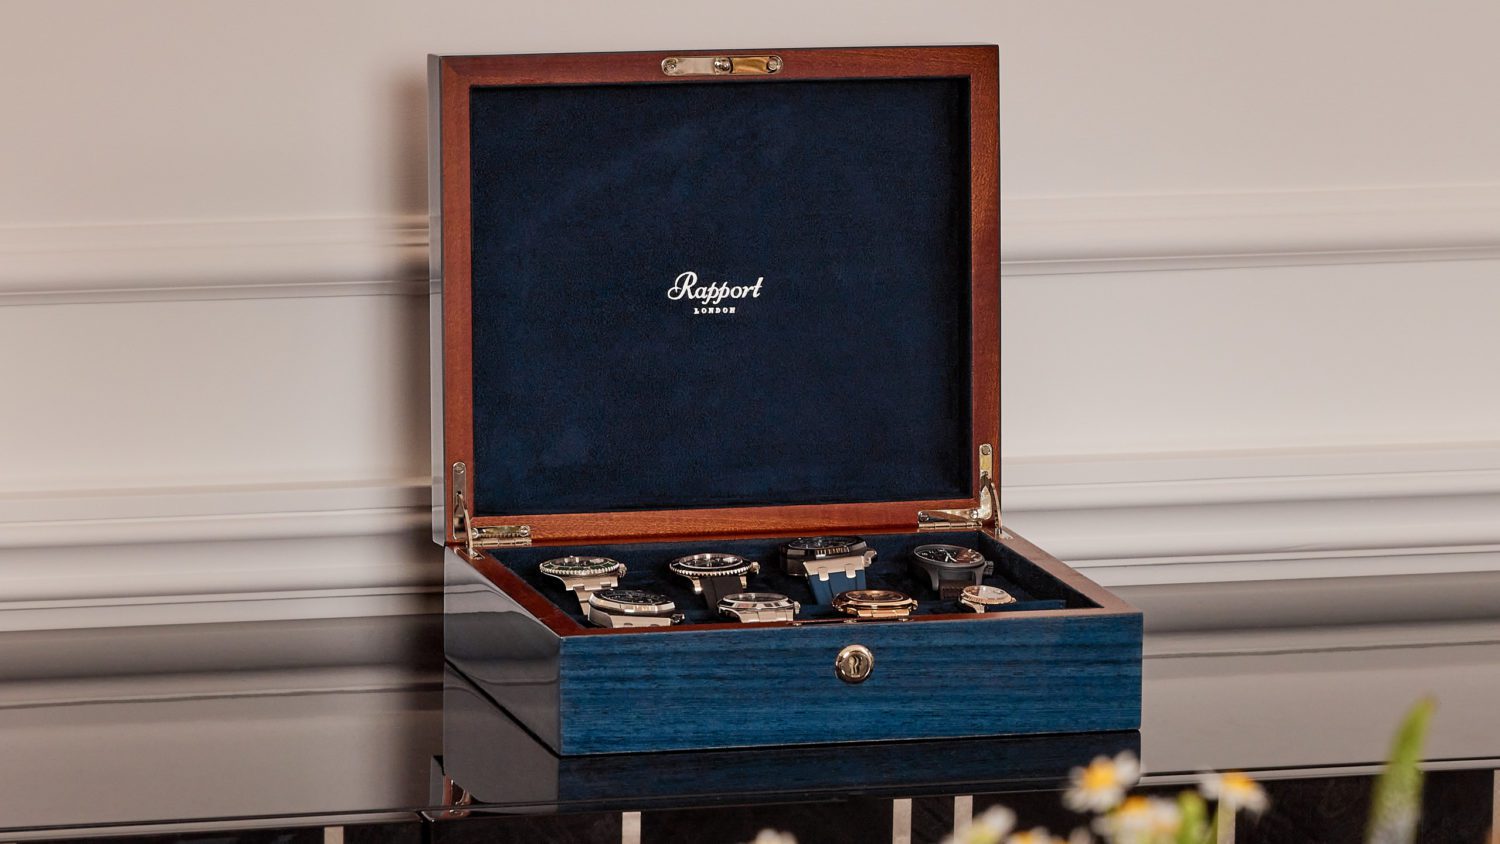 With timeless elegance and impeccable craftsmanship, Rapport products are made to stand the test of time.